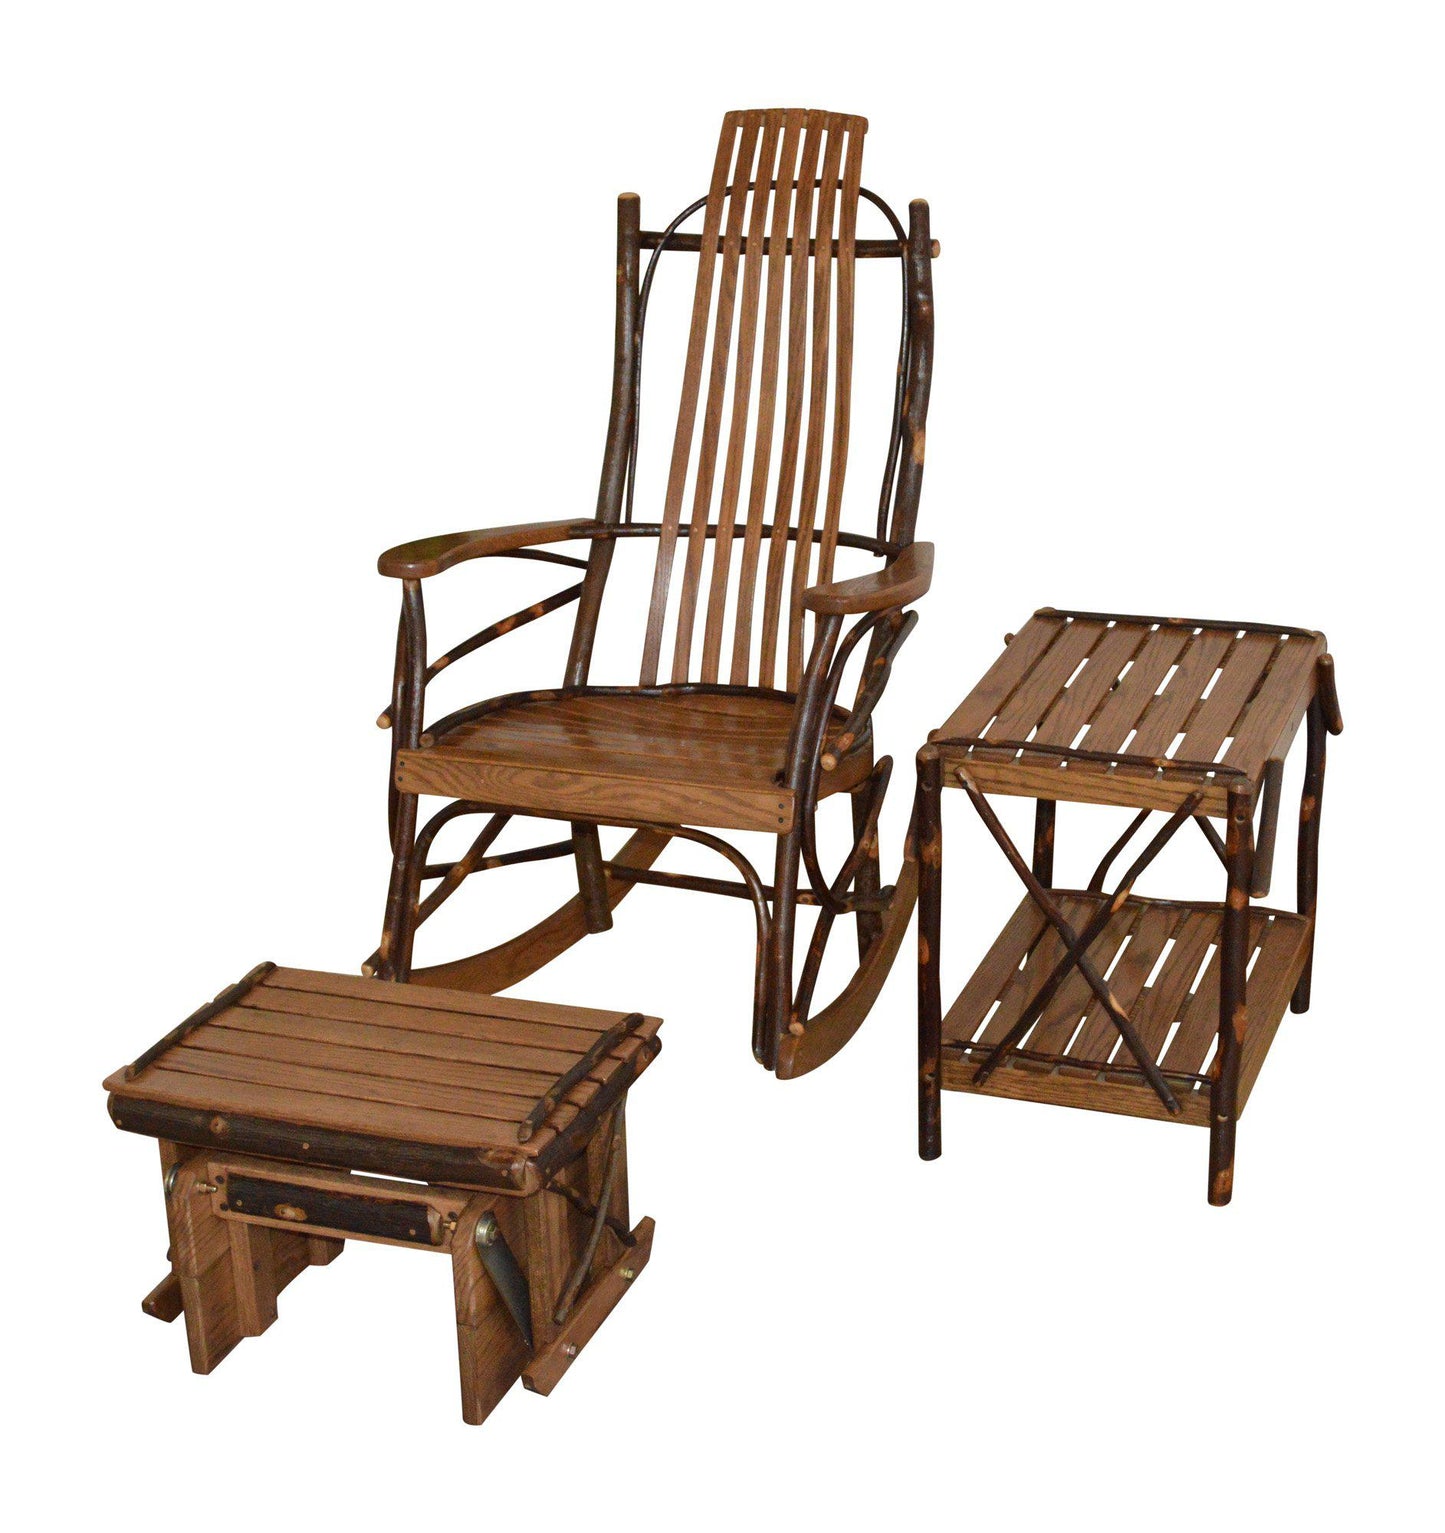 A&L Furniture Co. Amish Bentwood 7-Slat Hickory Rocking Chair With Gliding Ottoman and End Table Set - LEAD TIME TO SHIP 10 BUSINESS DAYS